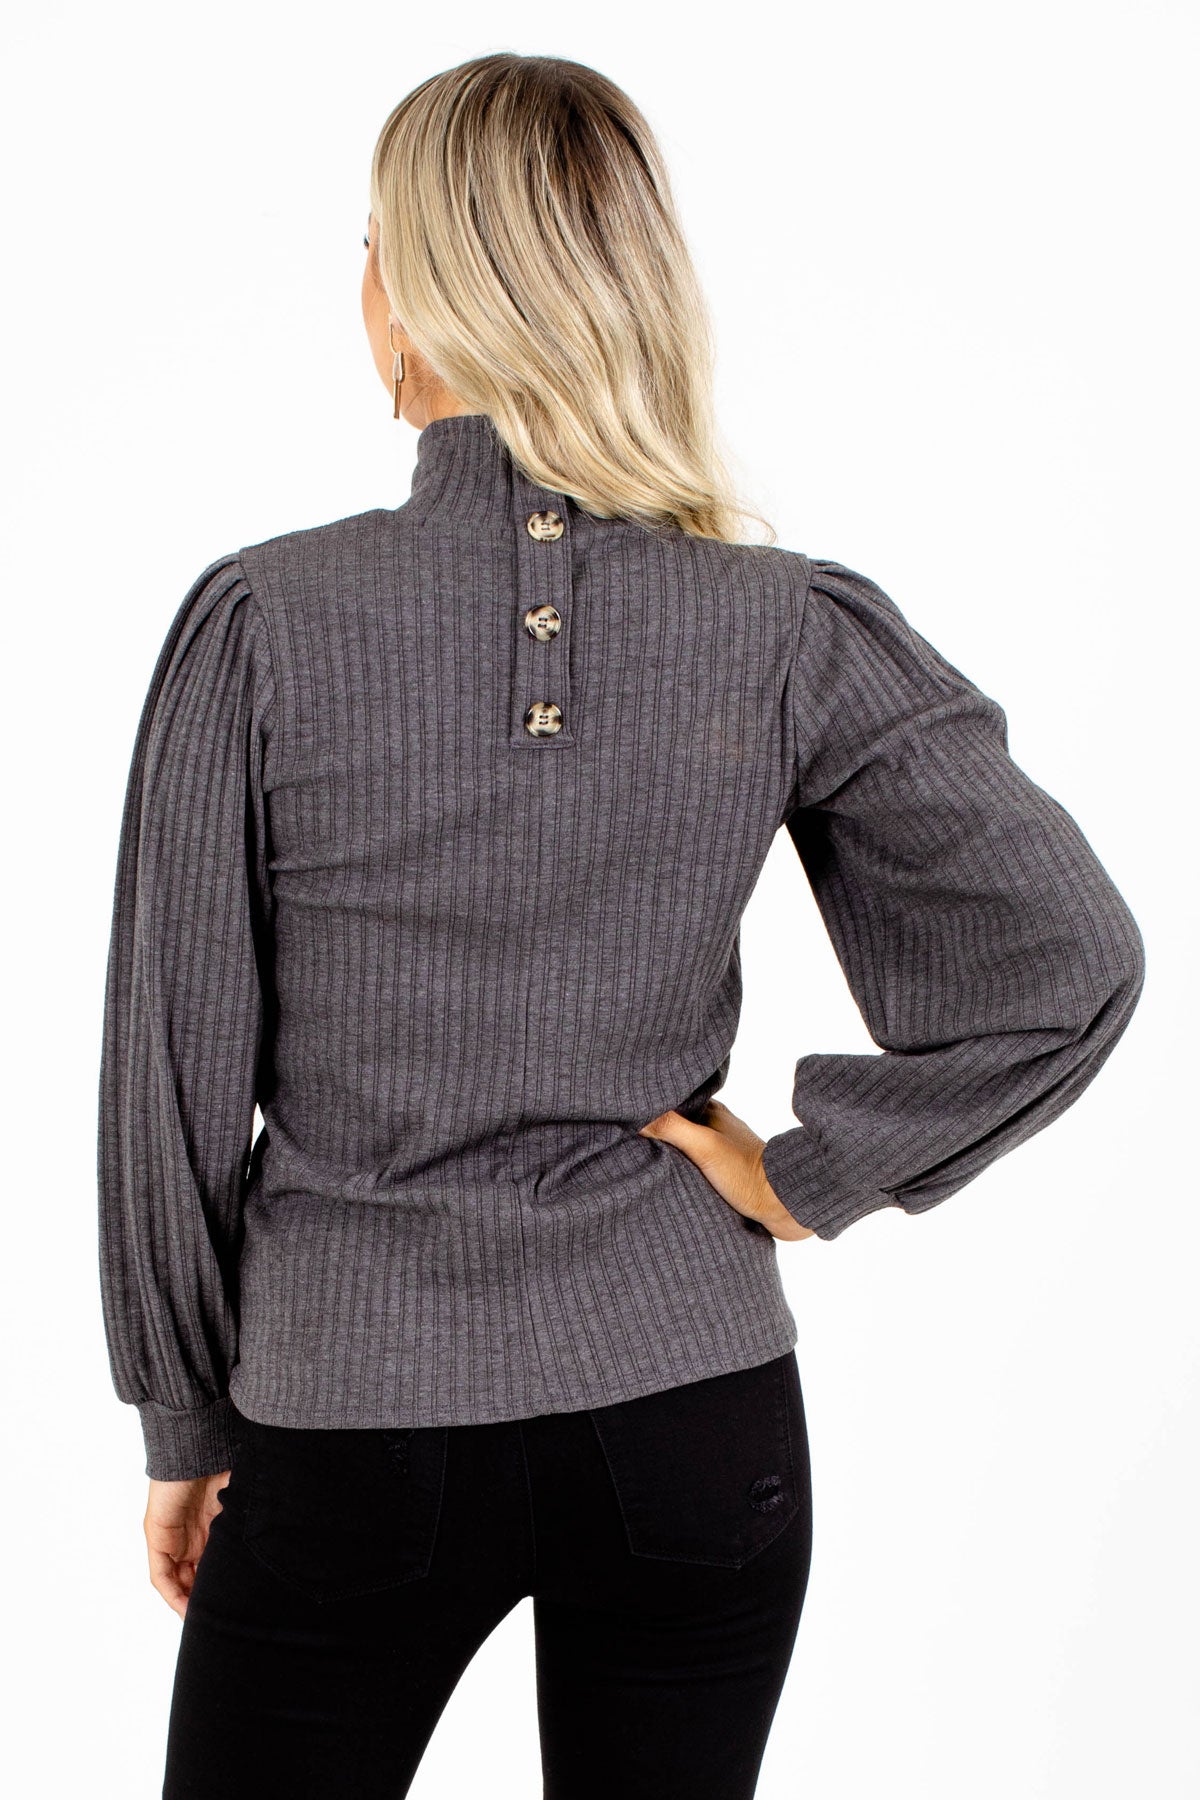 Ribbed Turtleneck with Buttons for Fall